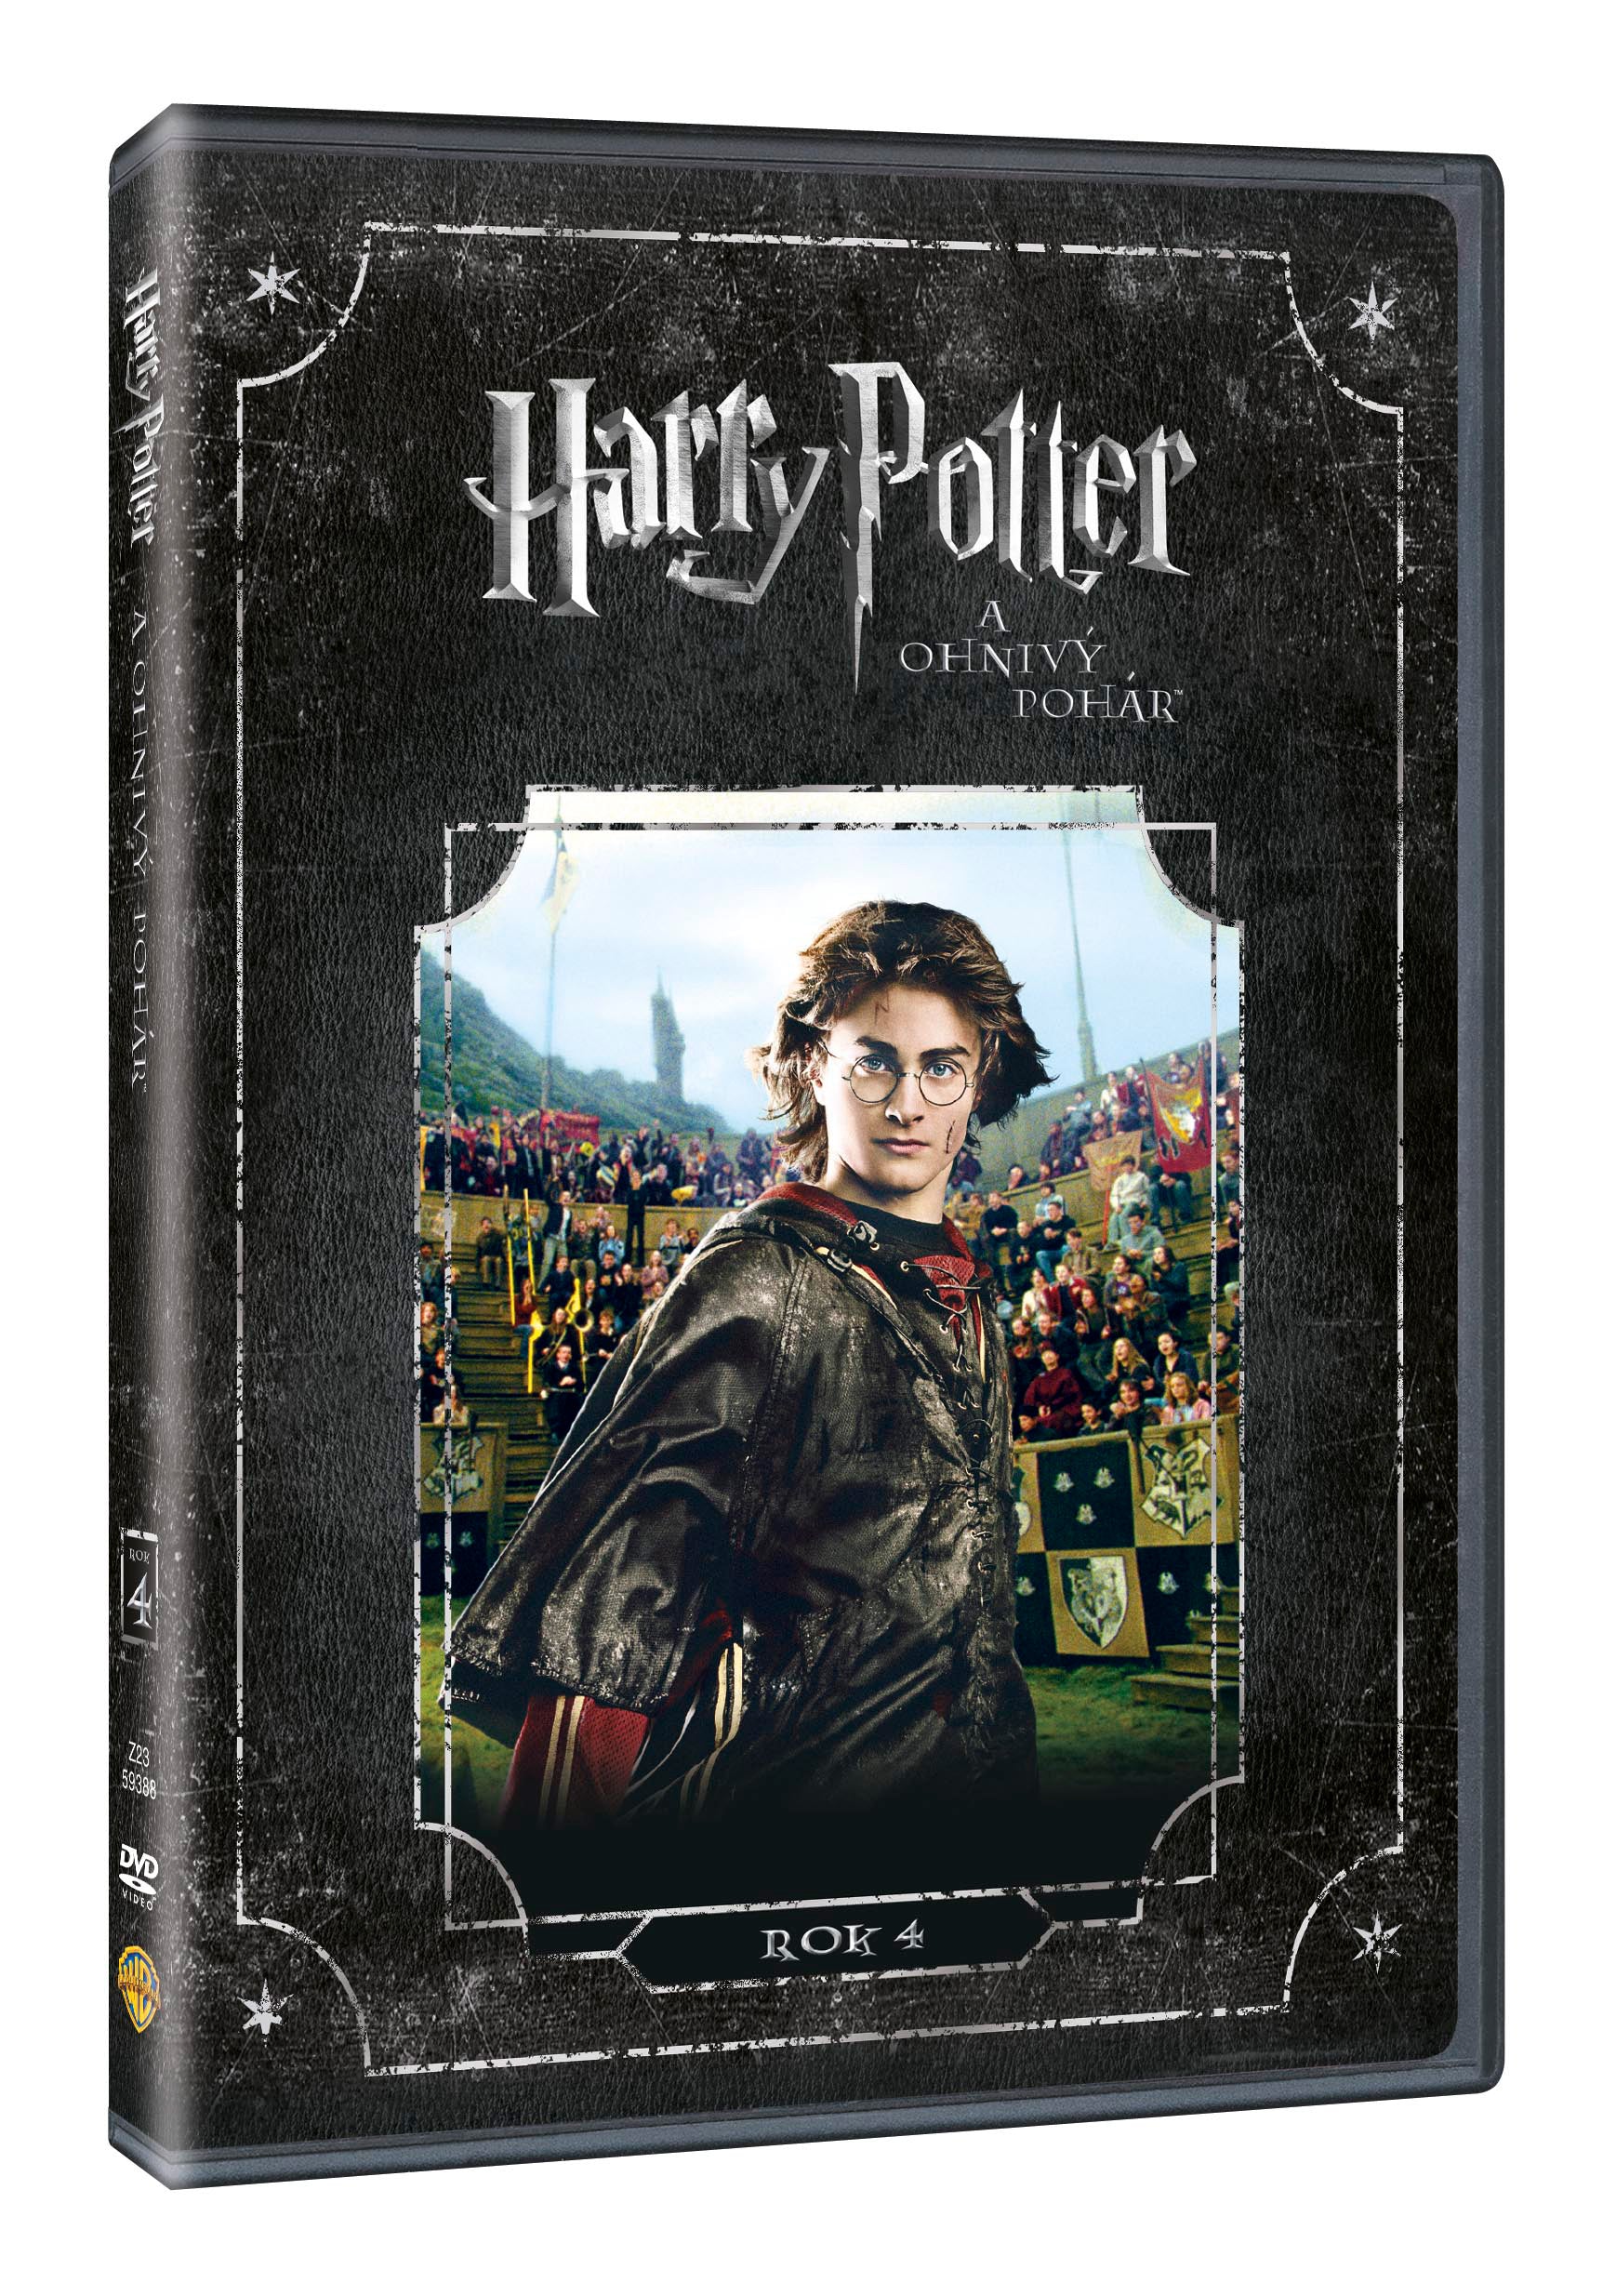 Harry Potter a Ohnivy pohar DVD / Harry Potter and the Goblet of Fire